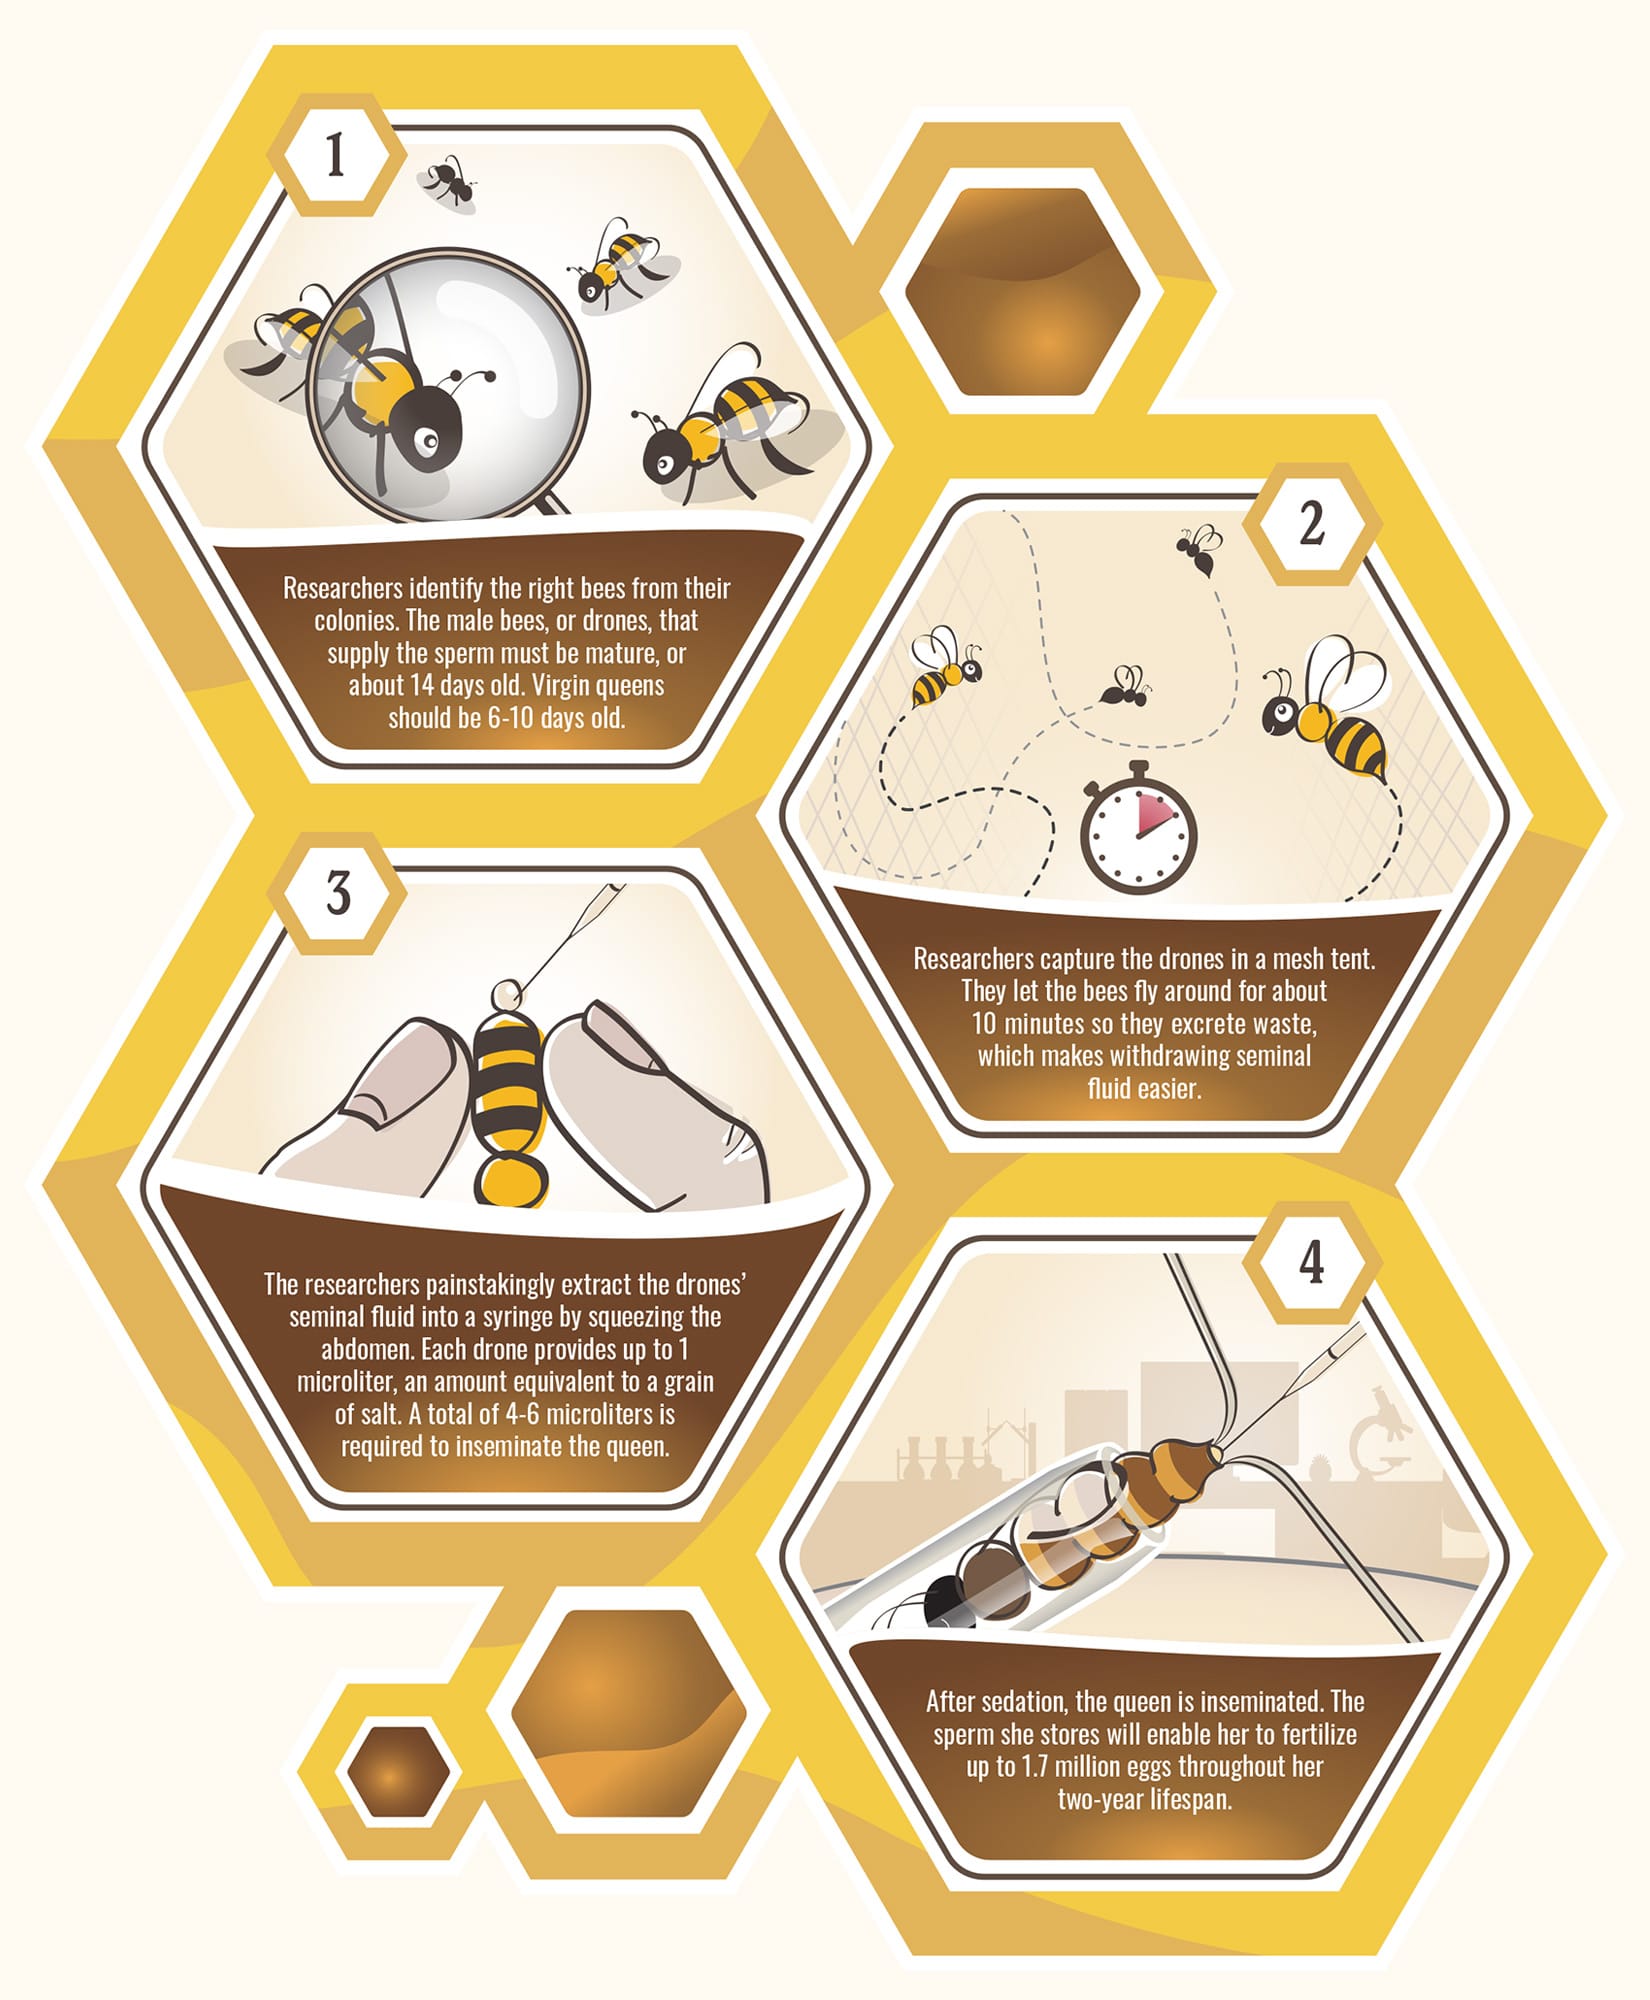 Breeding better bees (Graphic)